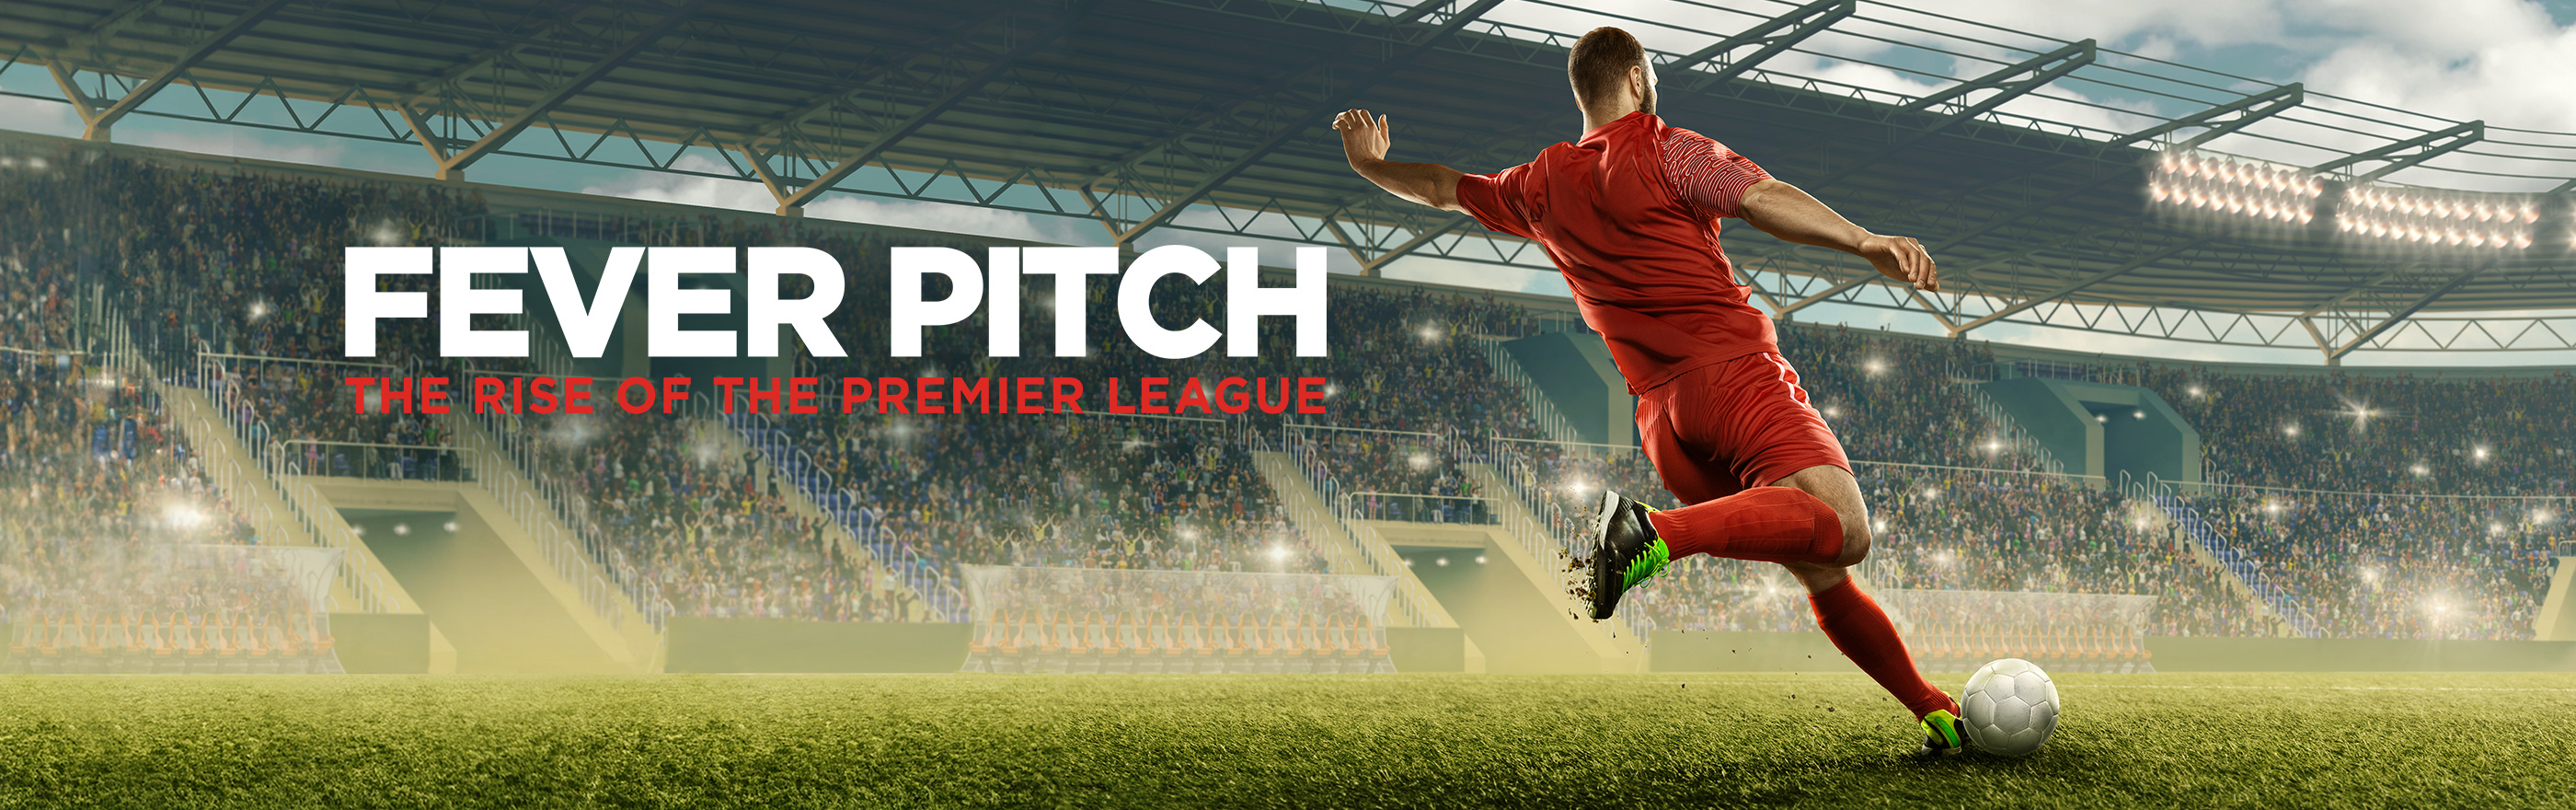 Fever Pitch: The Rise of The Premiere League LOGO